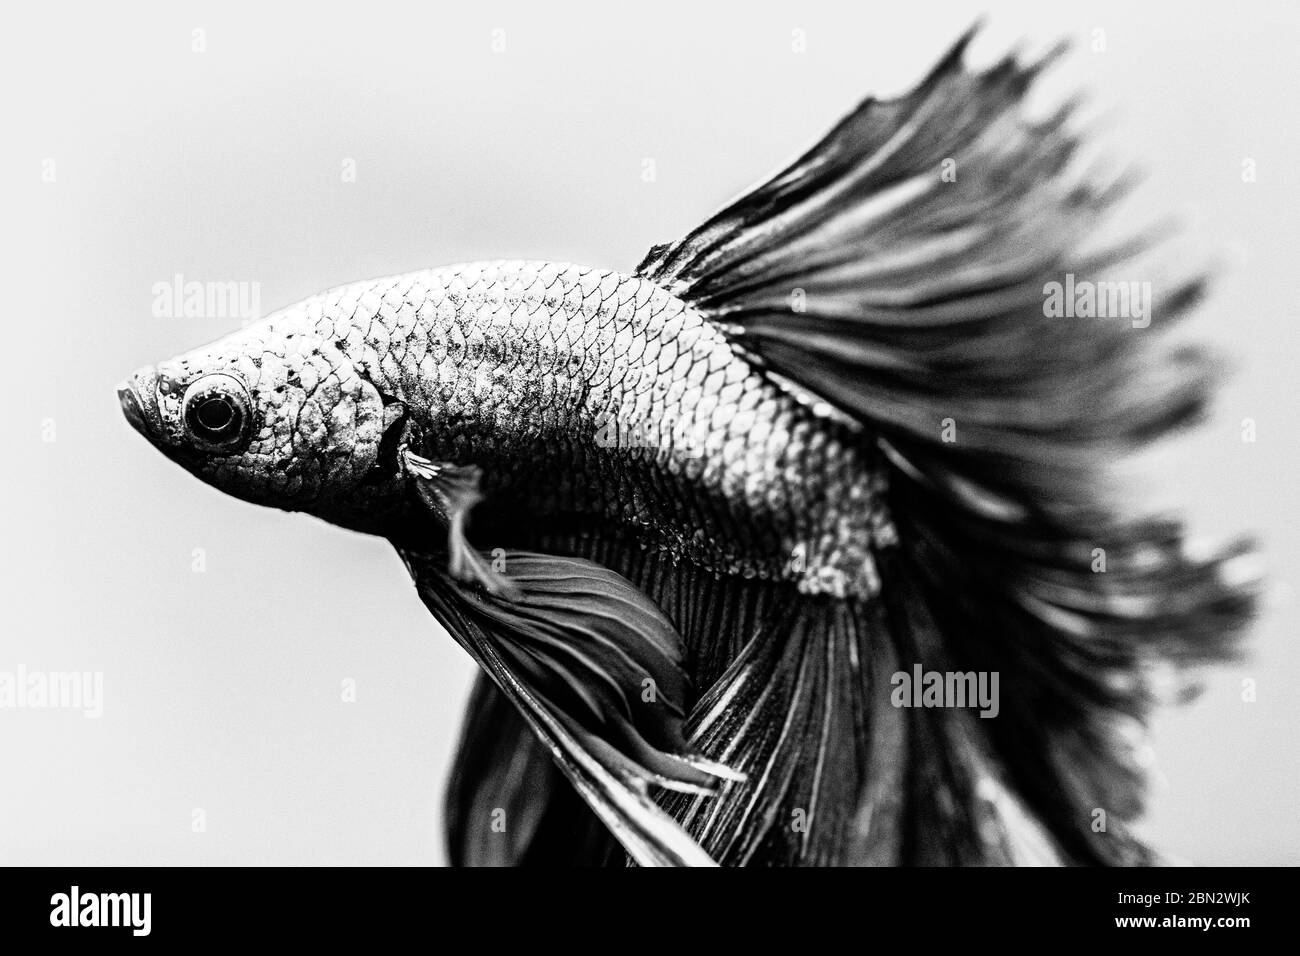 Portrait of a tropical freshwater fish Stock Photo